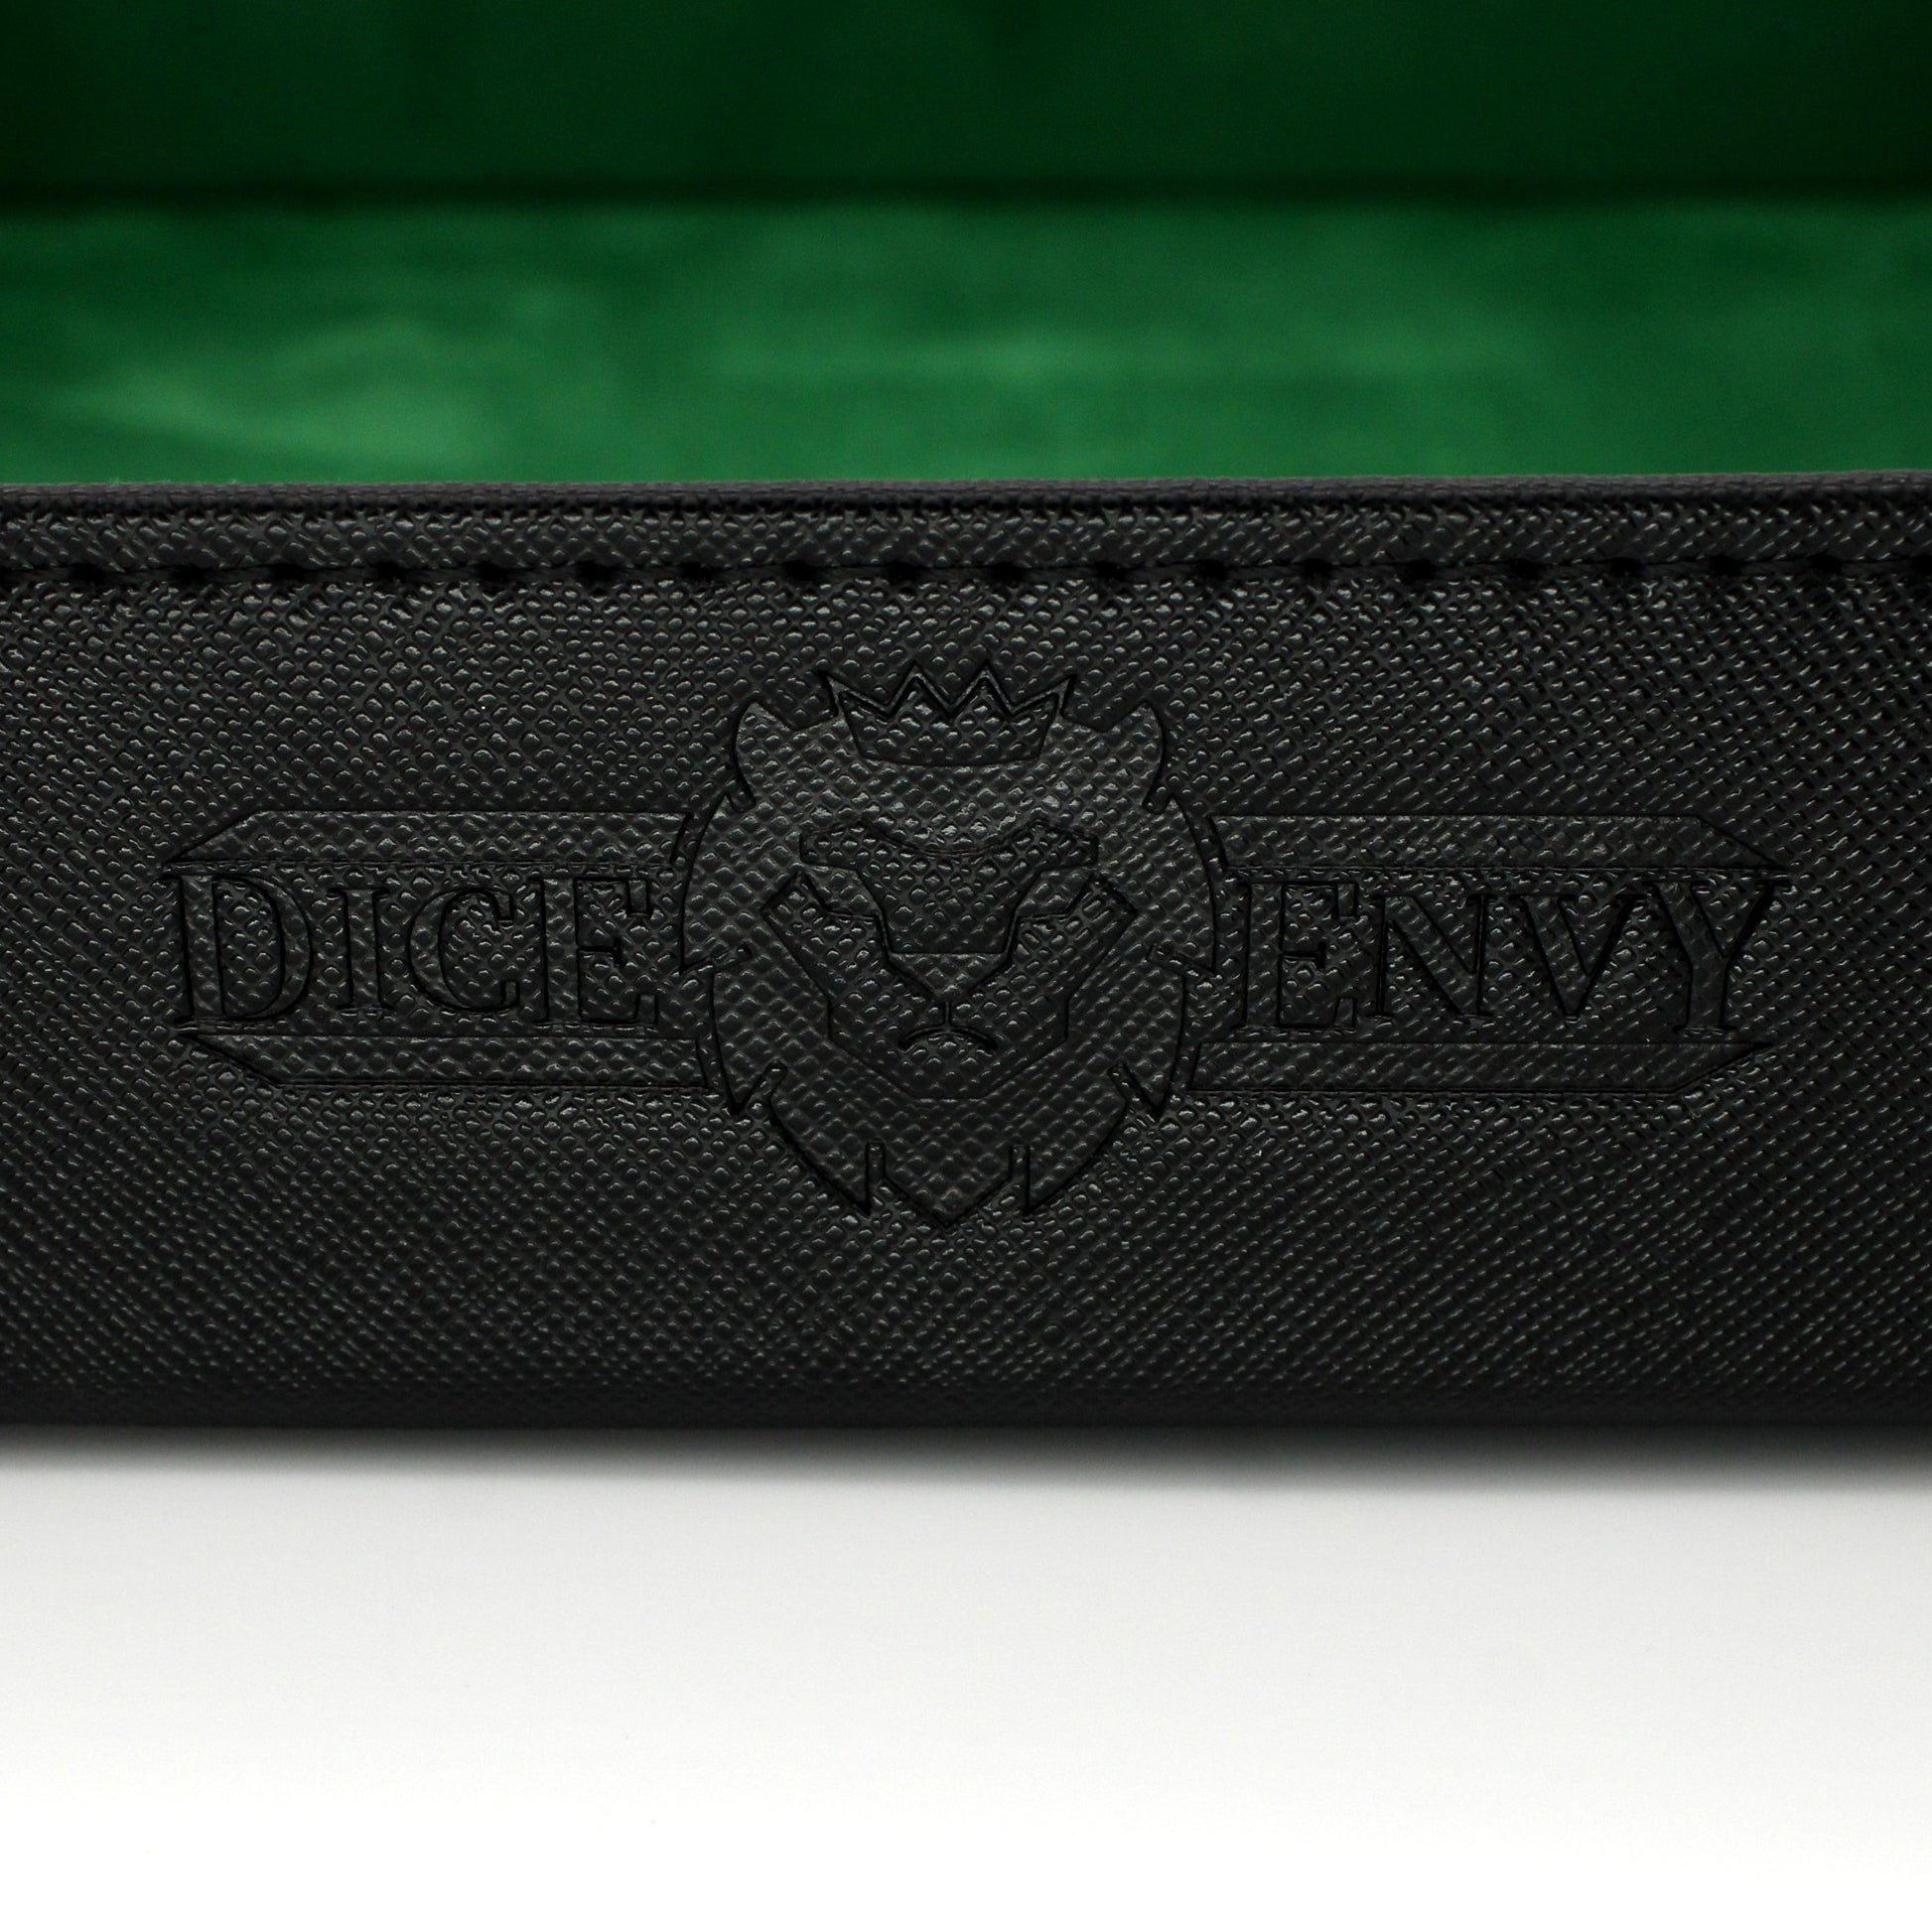 Made of vegan leather and microsuede, our dice trays have hidden magnets that hold them together and are available in druid green, warlock purple, barbarian tan, rogue red, and necromancer black.